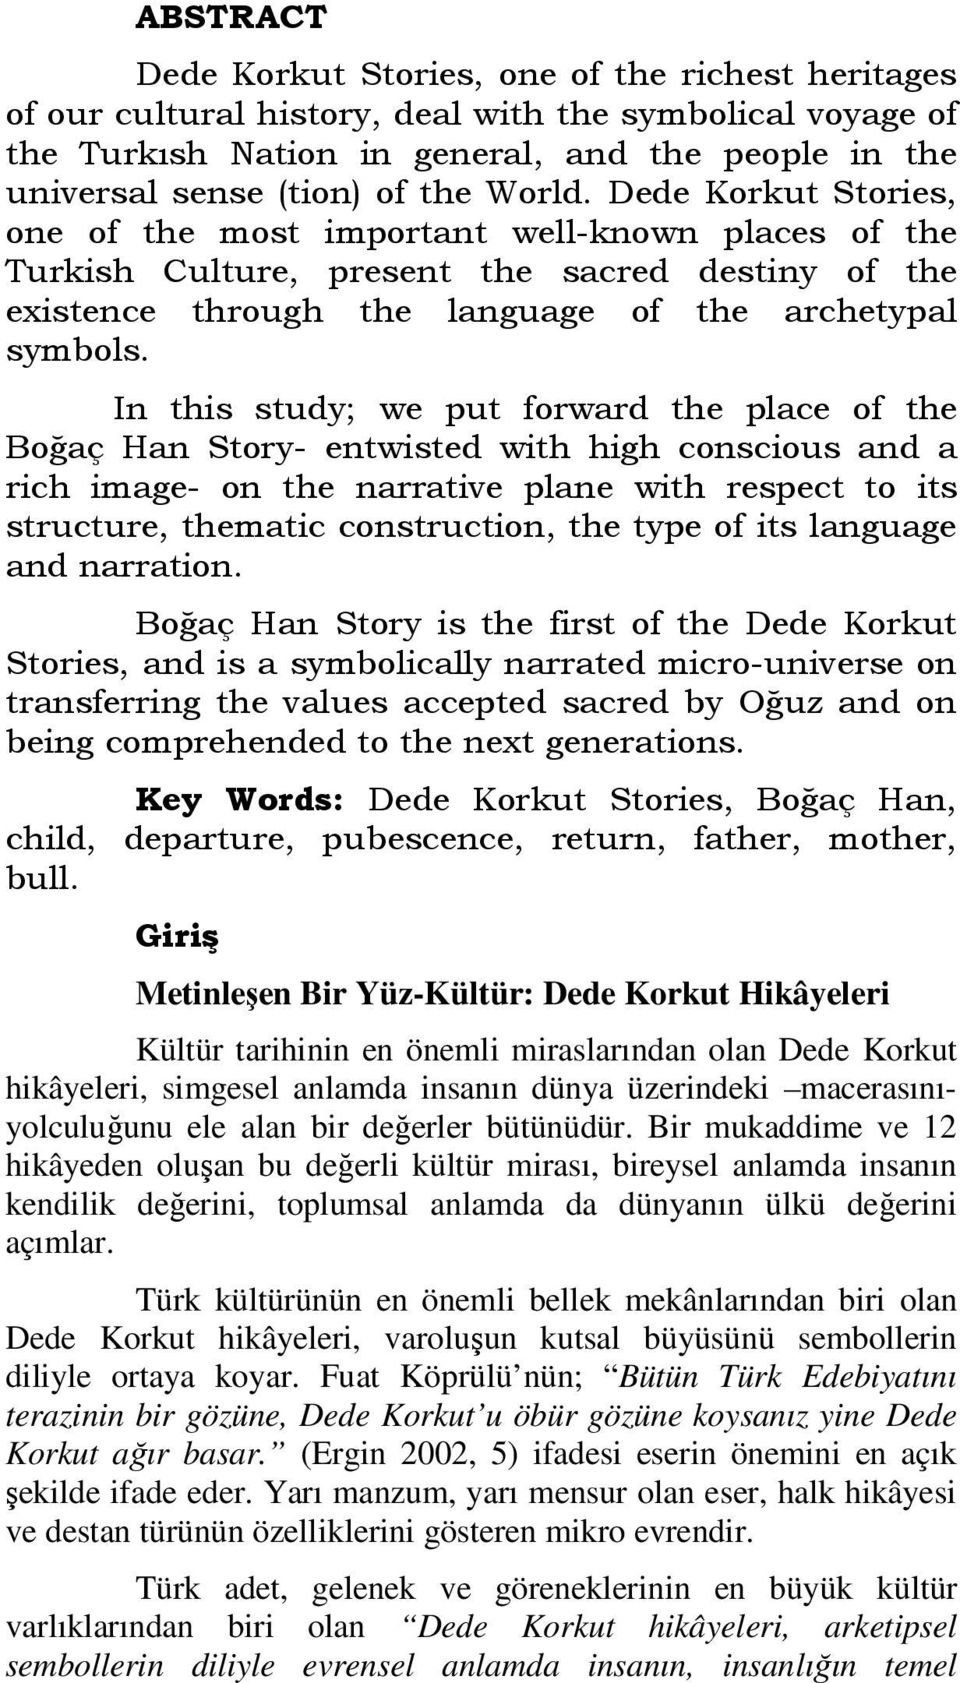 In this study; we put forward the place of the Boğaç Han Story- entwisted with high conscious and a rich image- on the narrative plane with respect to its structure, thematic construction, the type